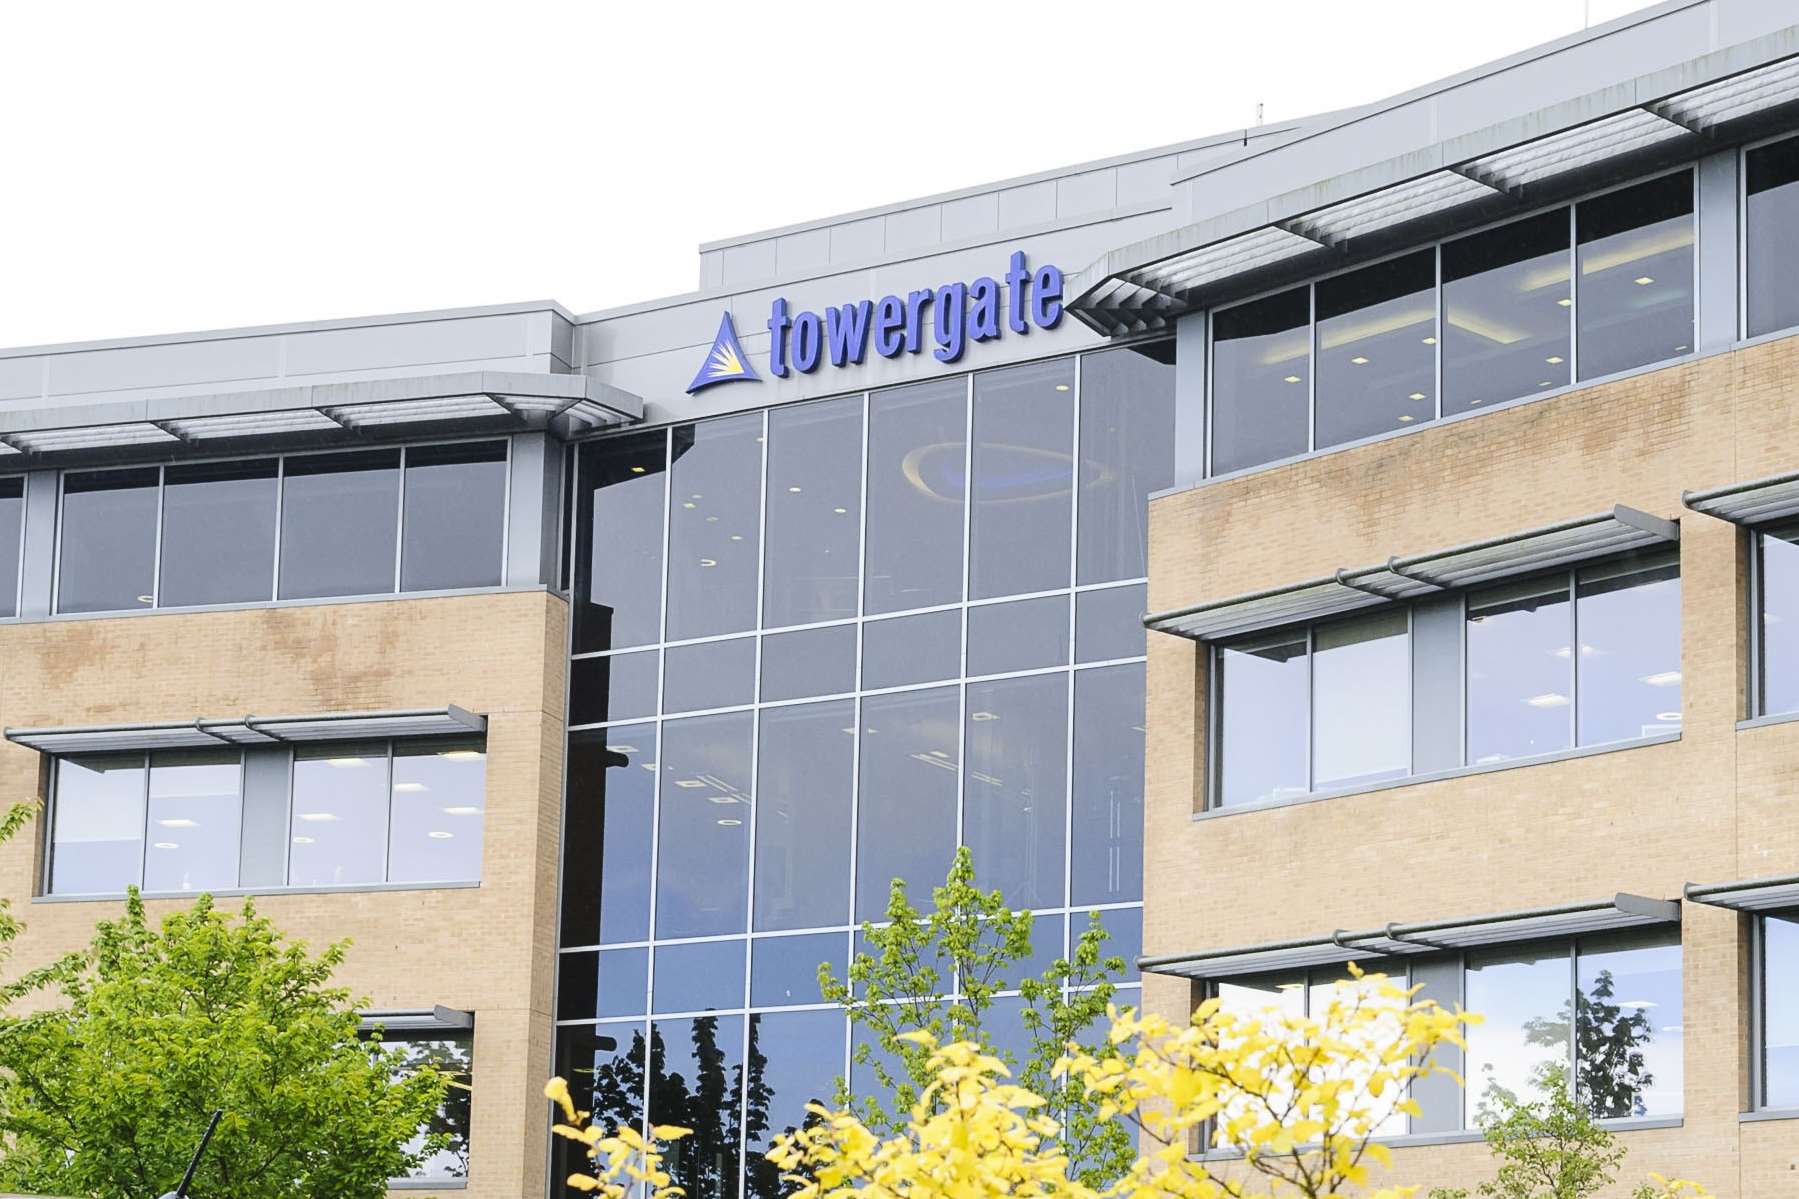 Towergate Group is based in Maidstone